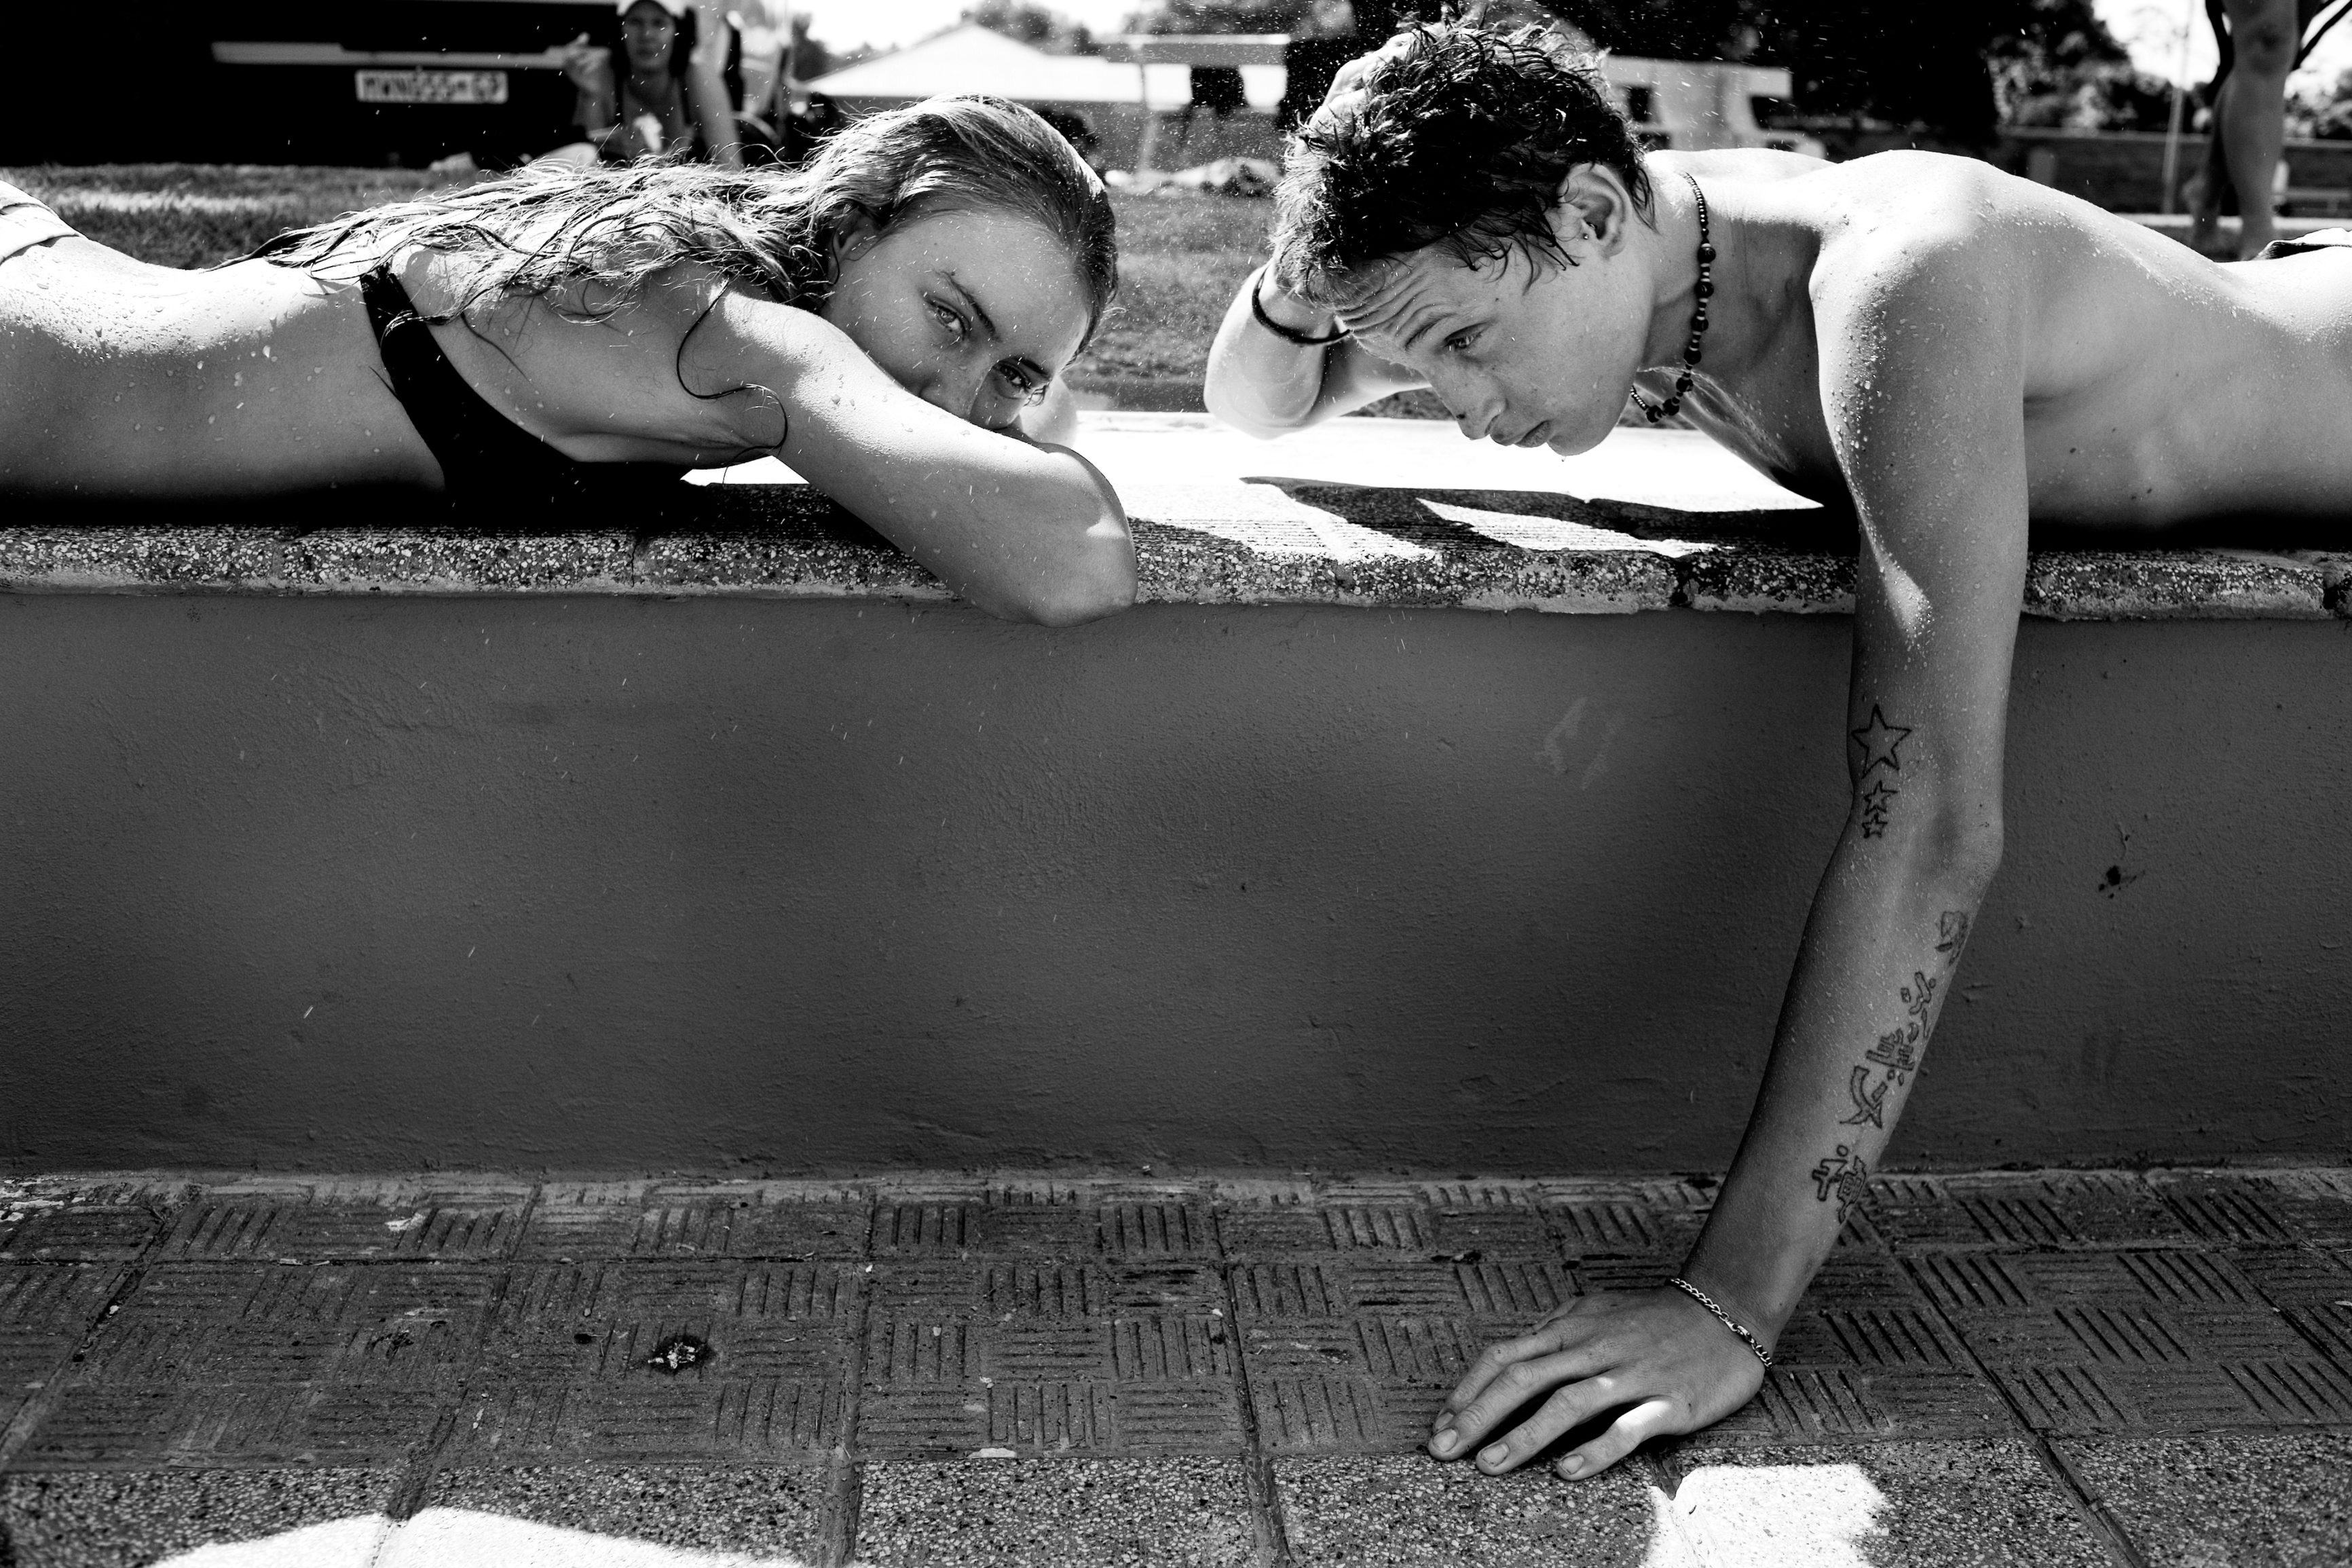 A young couple at the neighborhood pool in Brixton, a suburb of Johannesburg, South Africa in 2008.